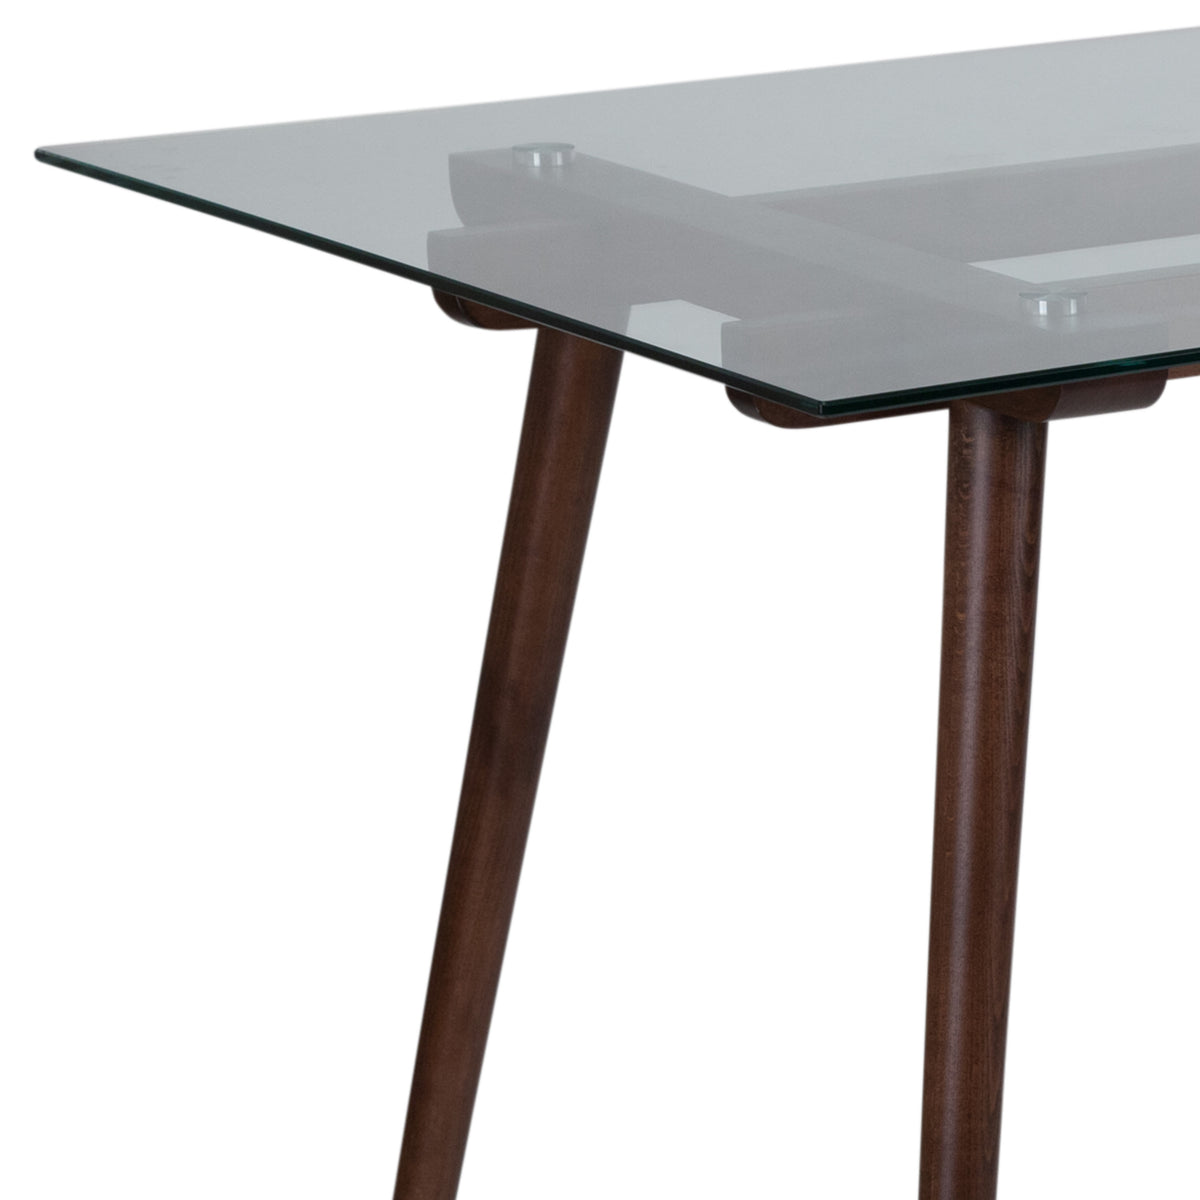 Clear Top/Walnut Frame |#| 31.5inch x 55inch Rectangular Solid Walnut Wood Table with Clear Glass Top